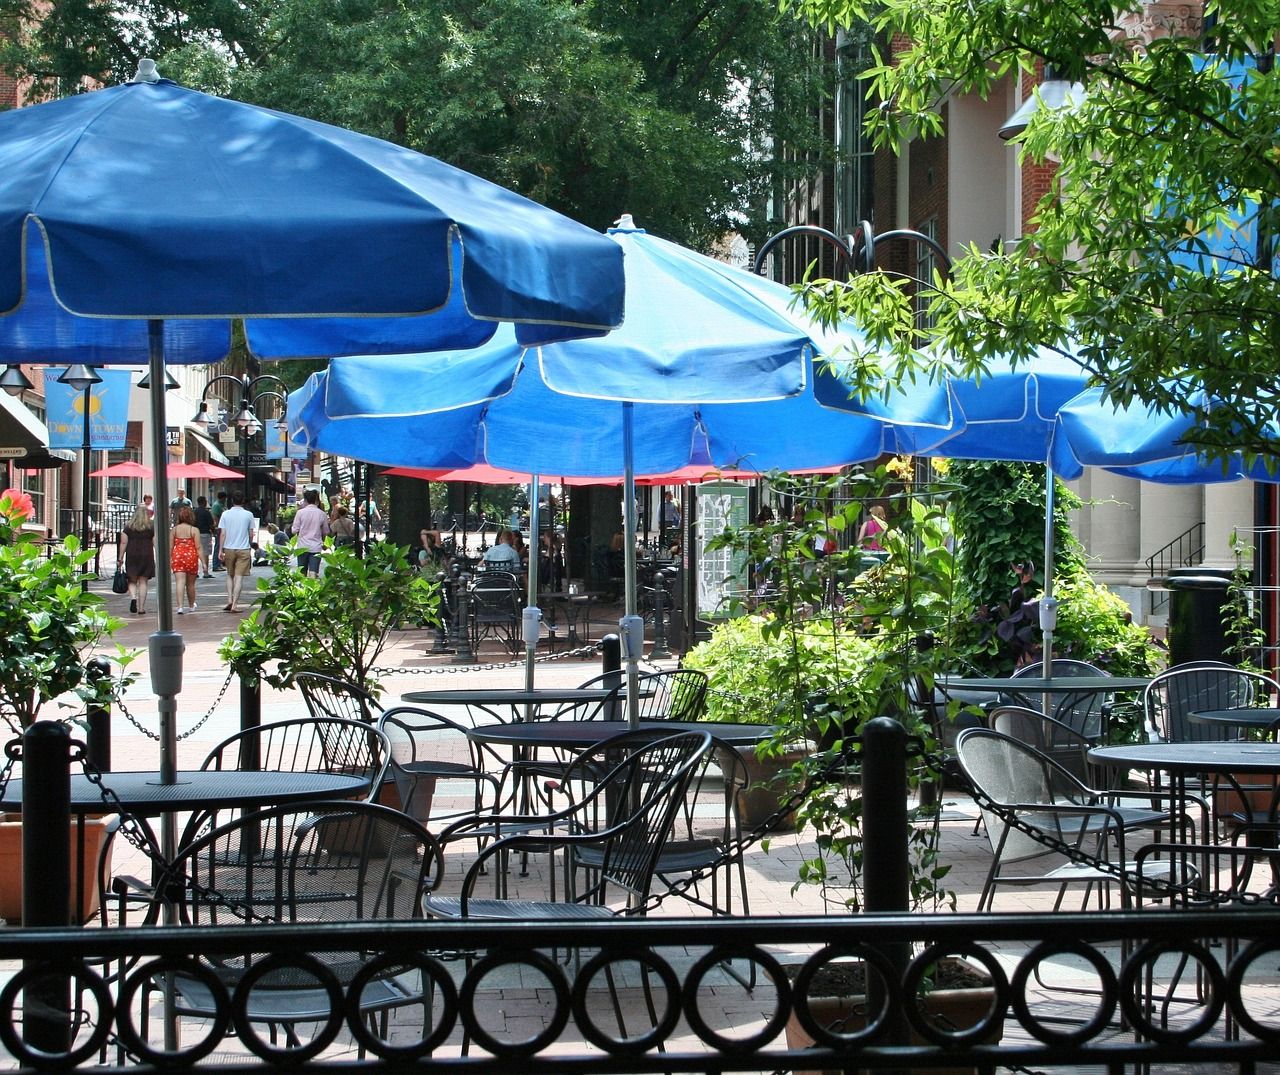 Restaurant in the Downtown Area of Charlottesville, VA with tables